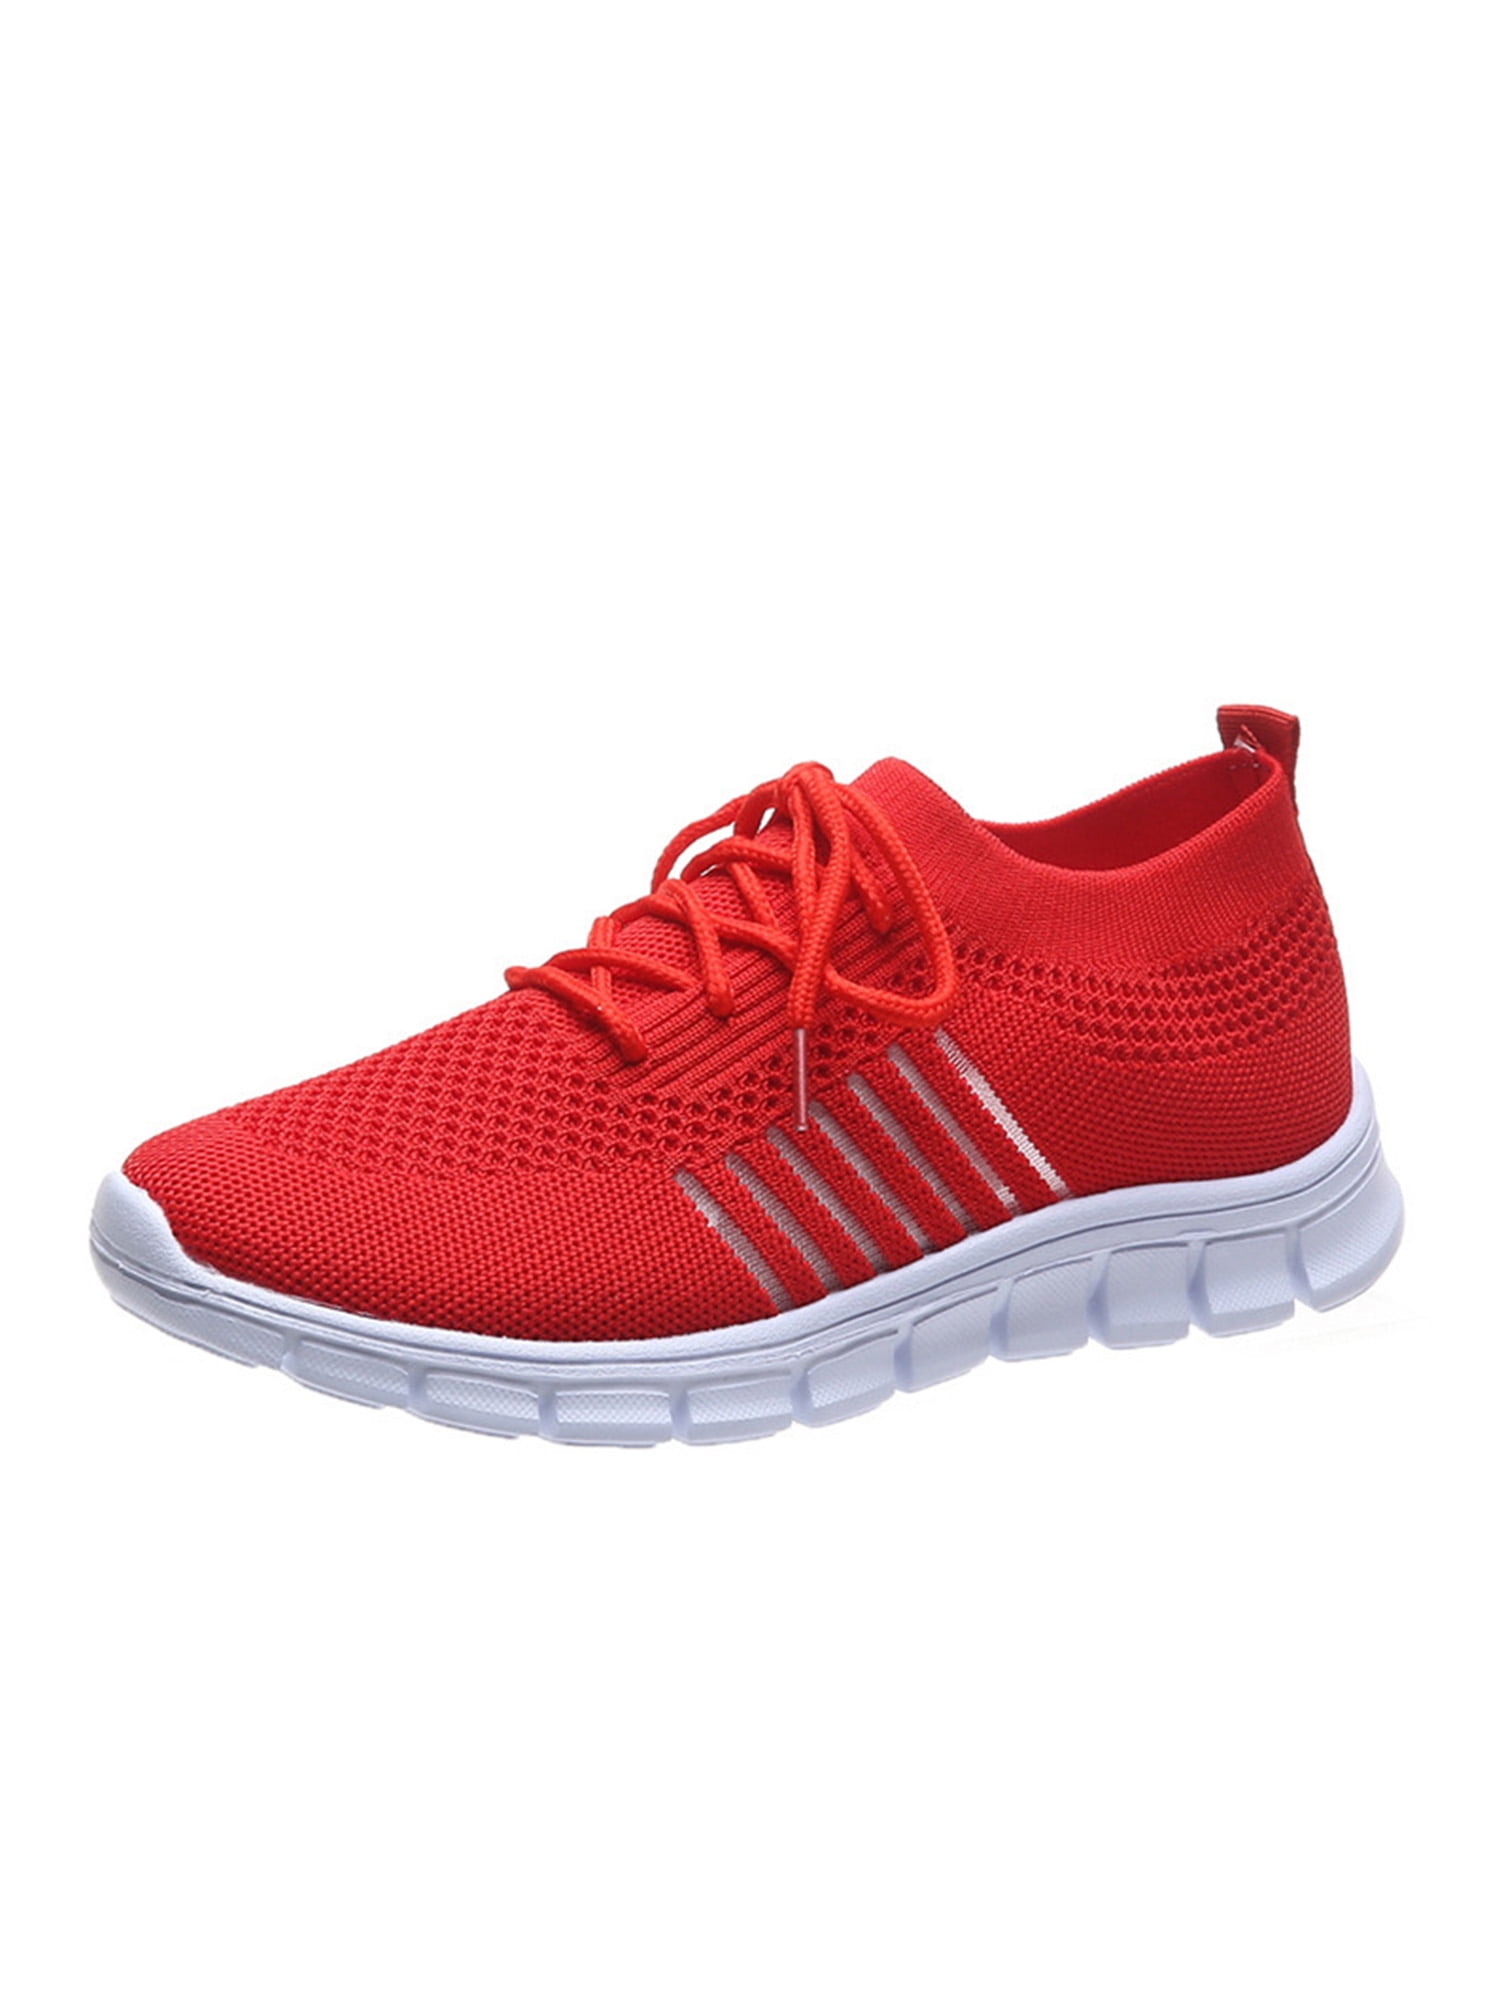 Details about  / Women/'s Chunky Heel Sneakers Lace Up Running Low Top Sport Gym Trainers Shoes